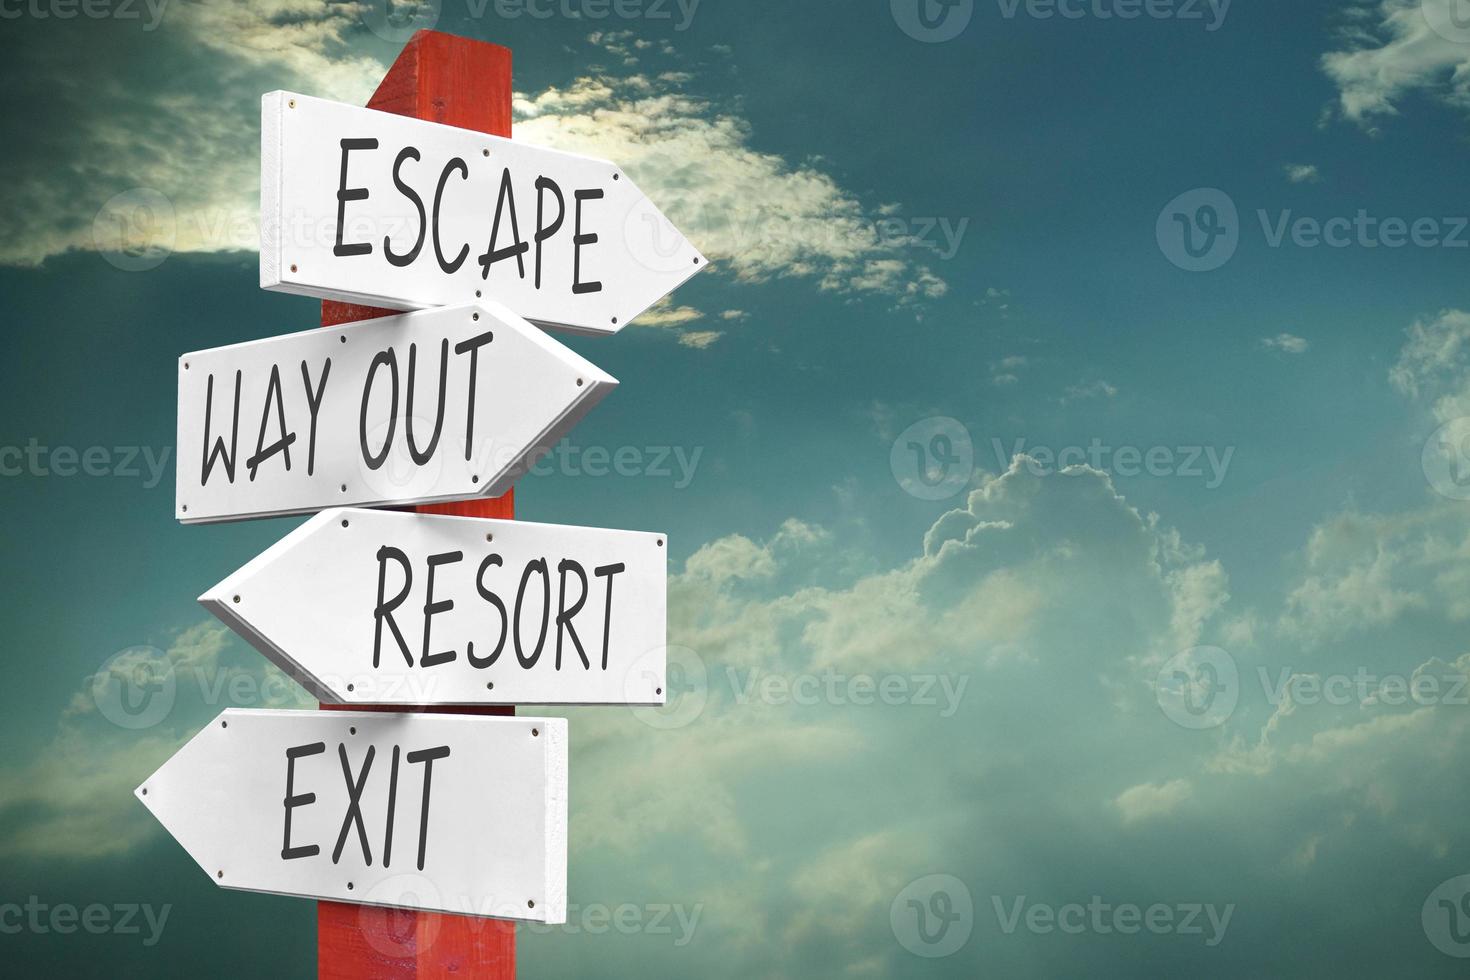 Escape, Way out, Resort, Exit - Wooden Signpost with Four Arrows photo